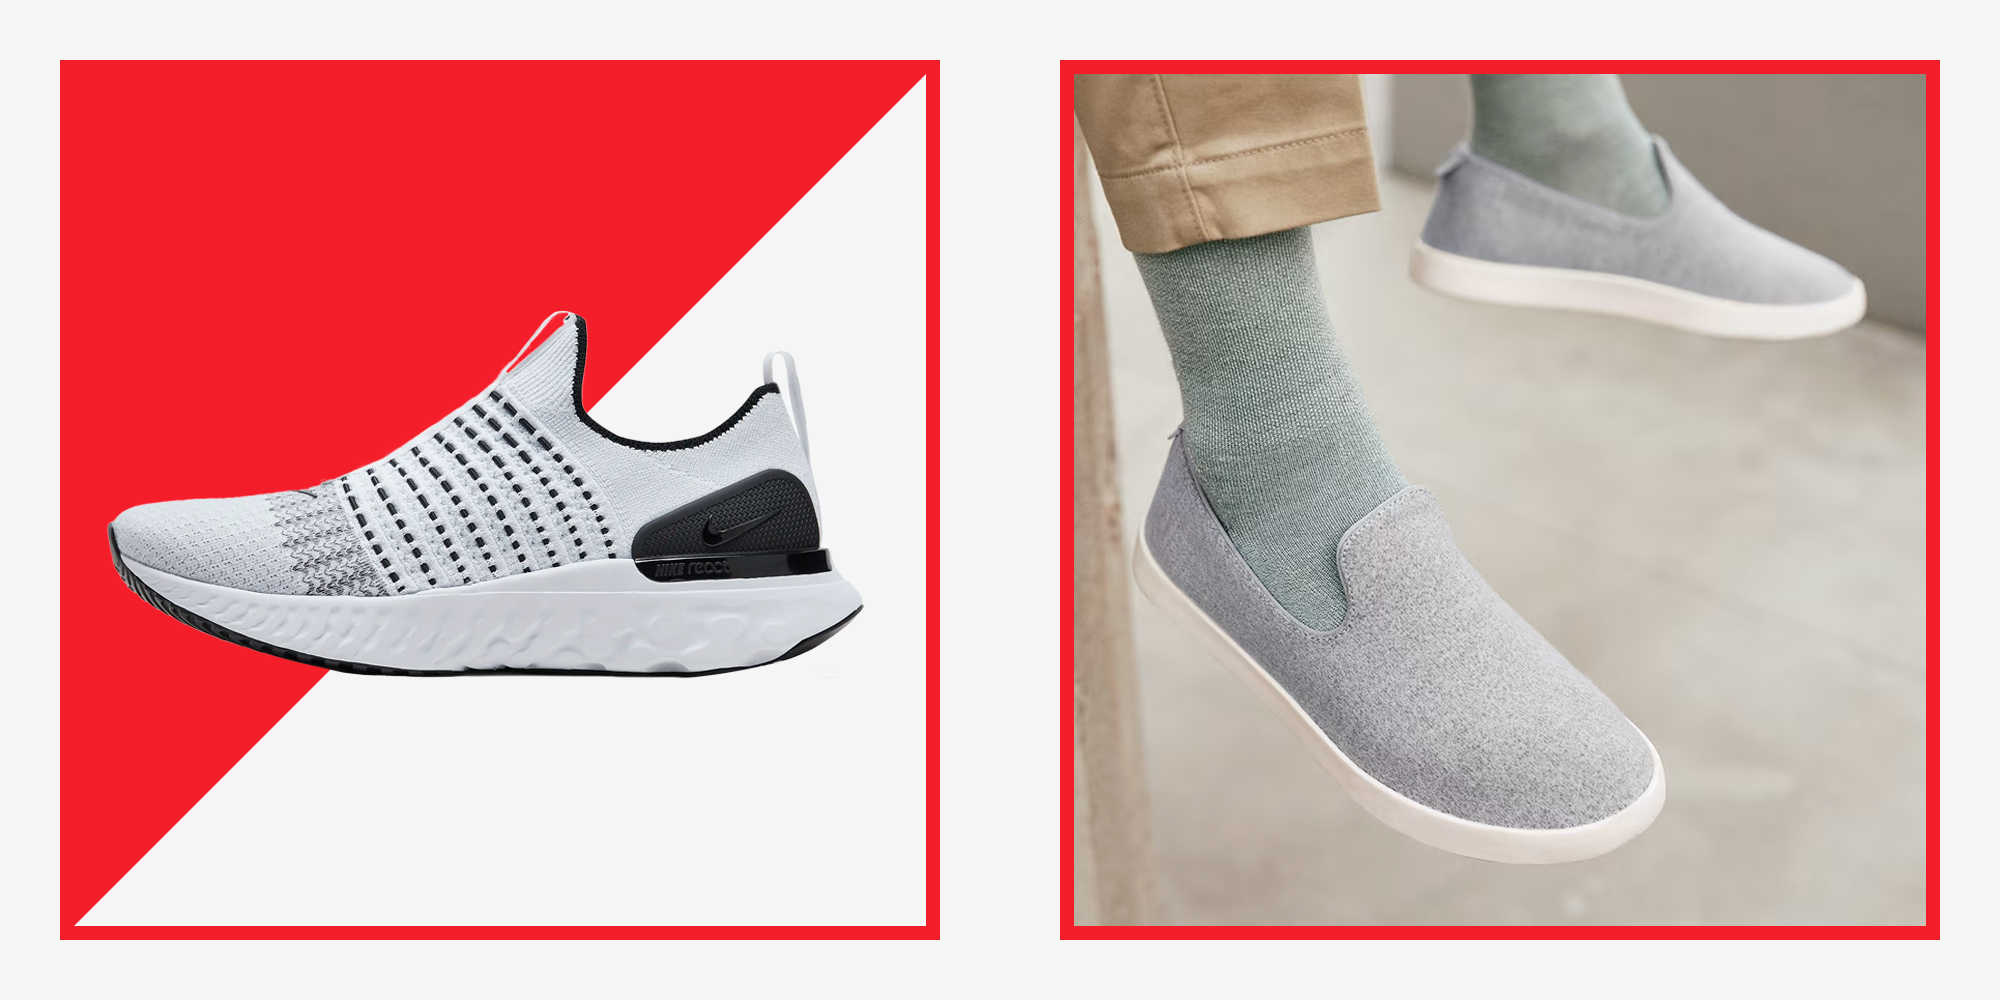 Shop Women's Slip-On Sneakers & Athletic Shoes & Save | DSW Canada